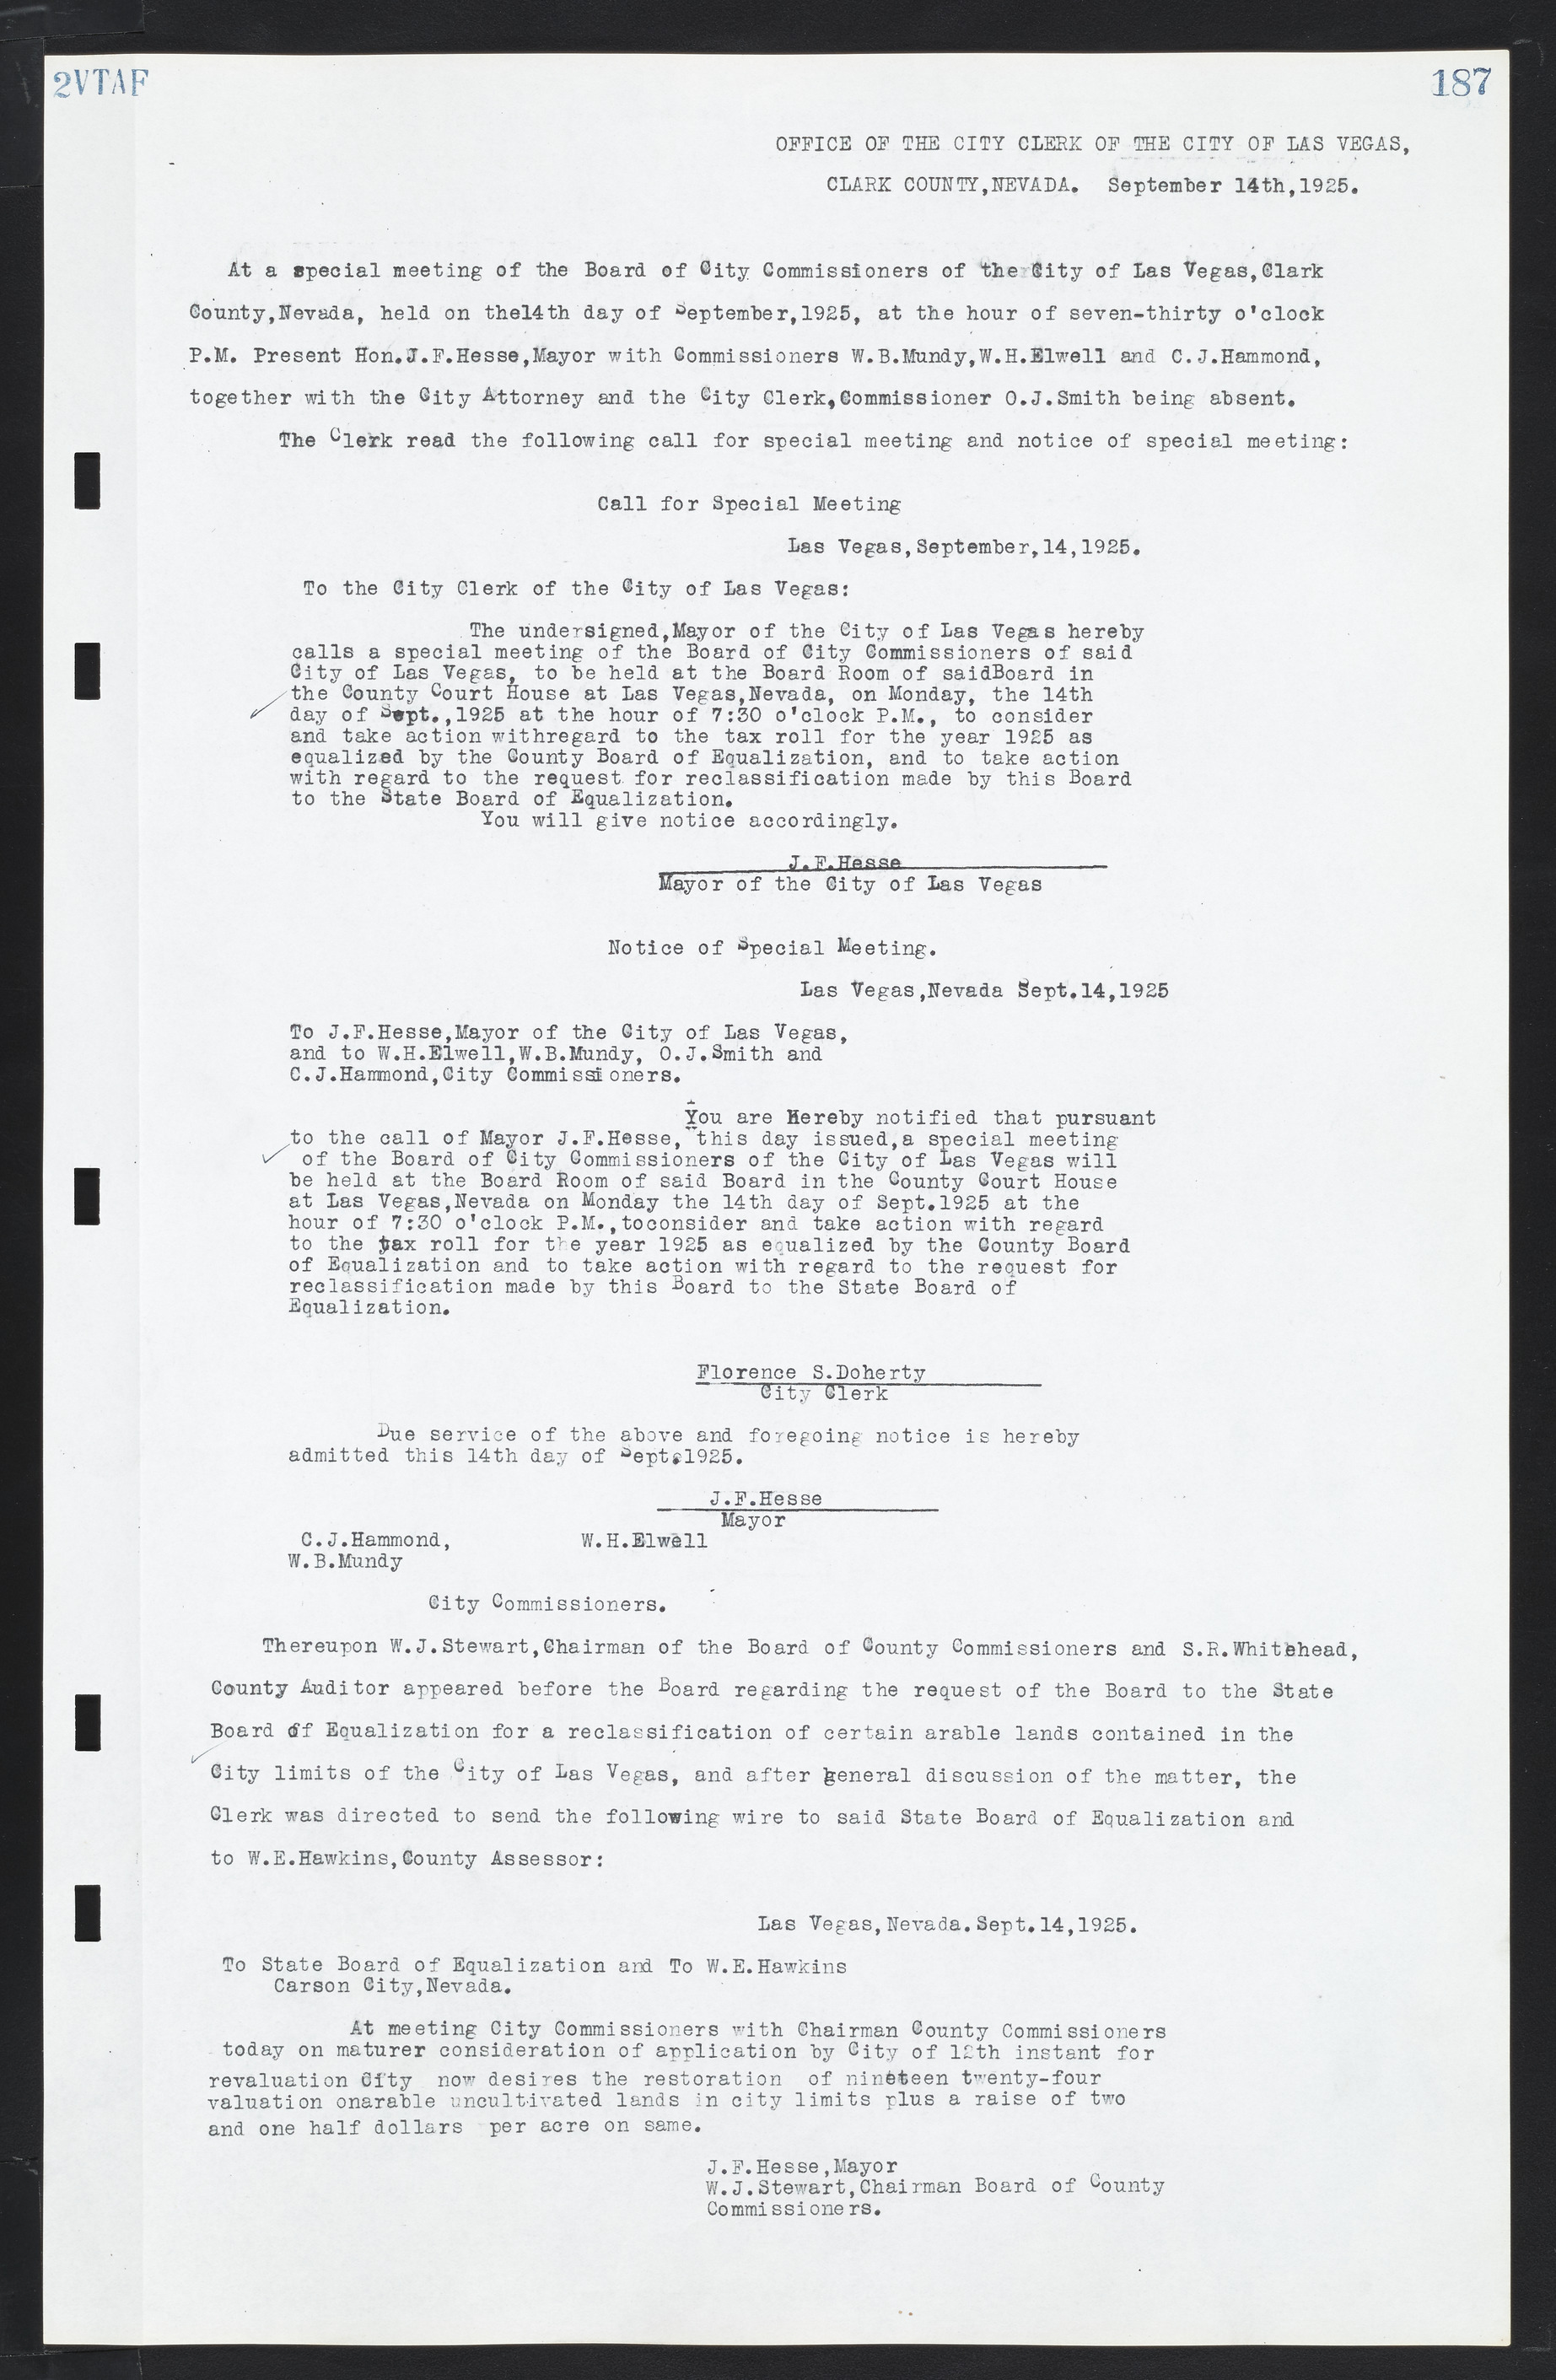 Las Vegas City Commission Minutes, March 1, 1922 to May 10, 1929, lvc000002-194